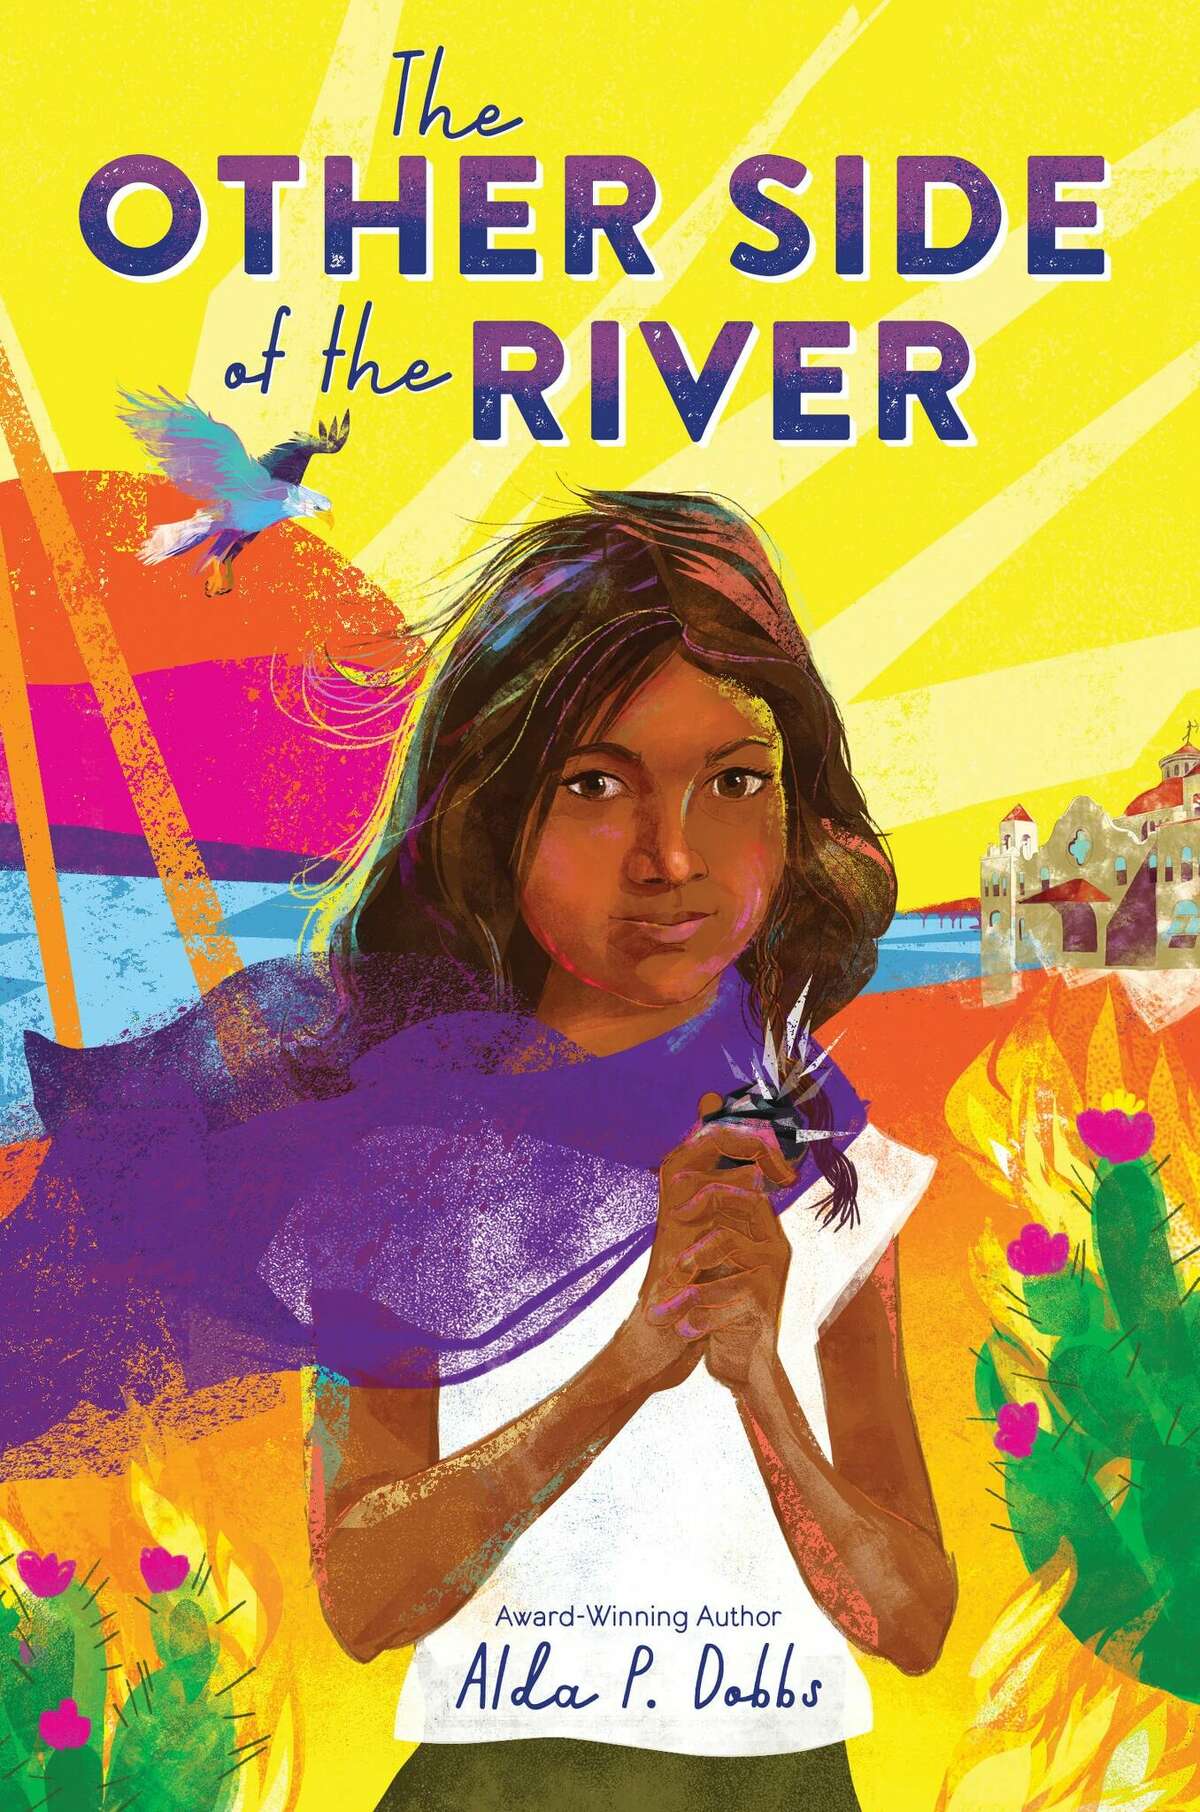 "The Other Side of the River" by Alda P. Dobbs.